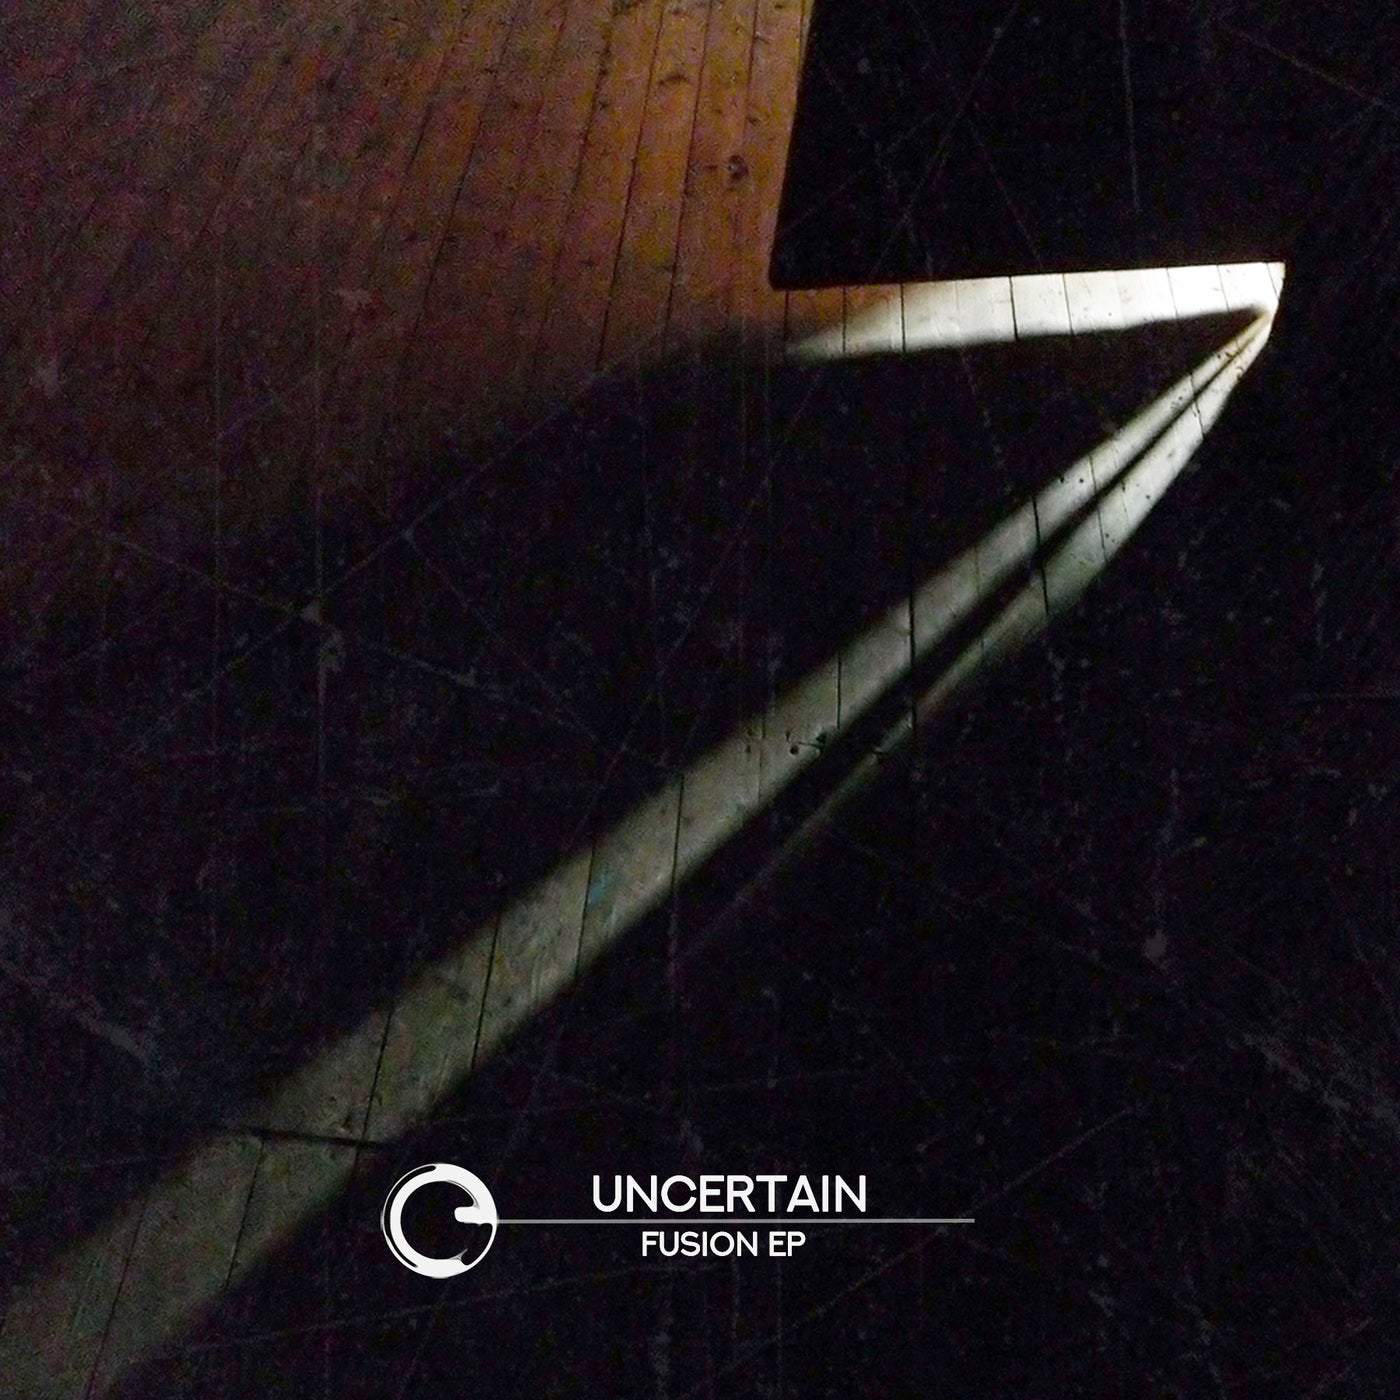 image cover: Fusion EP by Uncertain on Children Of Tomorrow